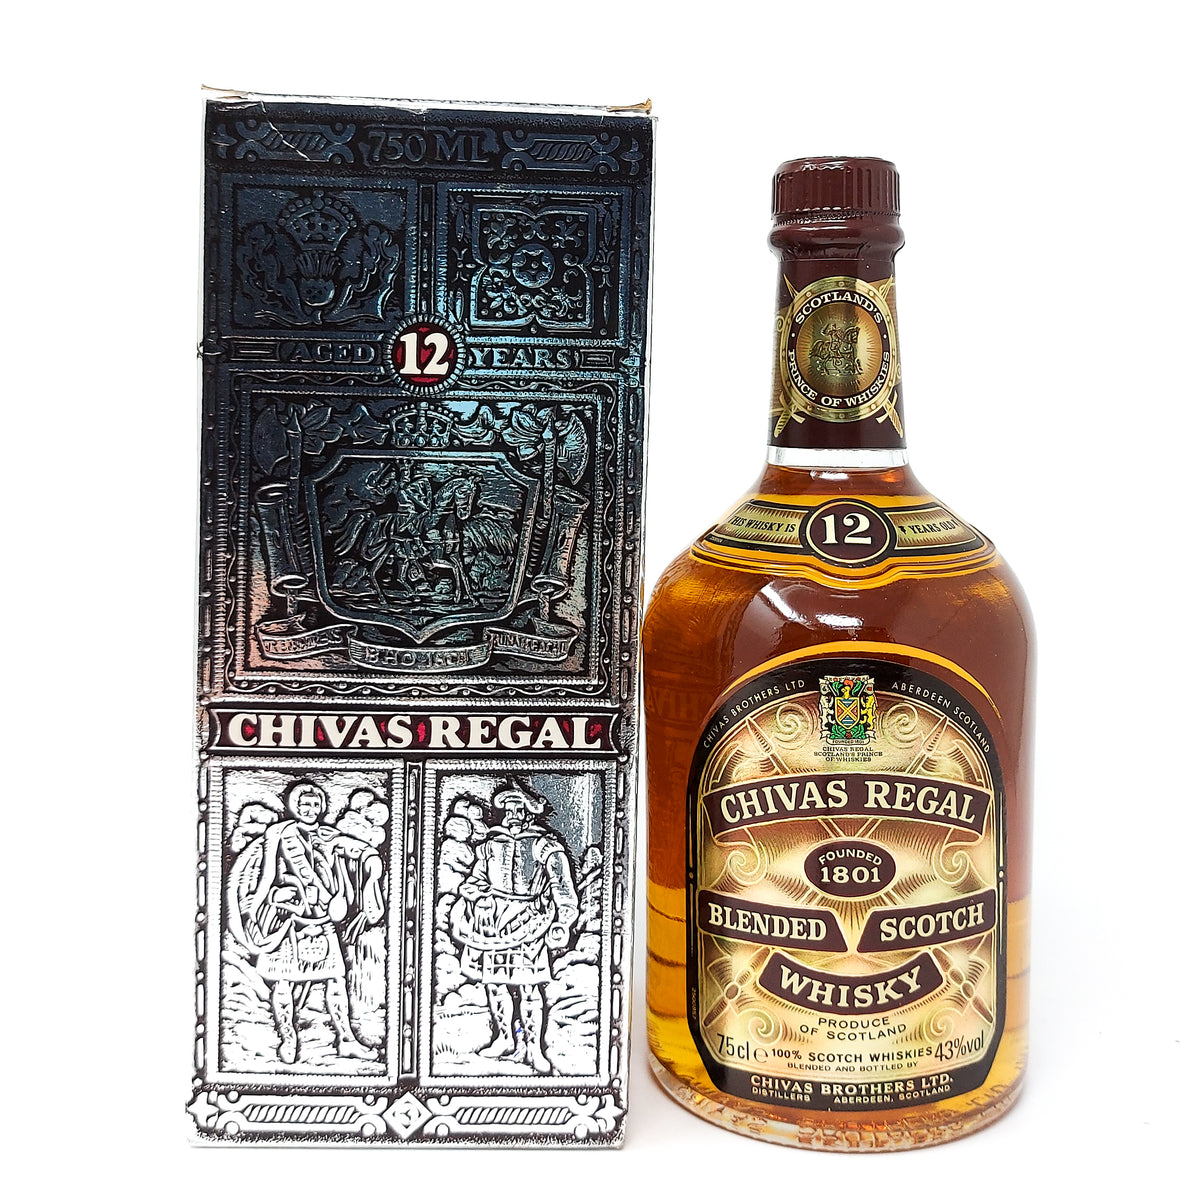 Chivas 12 Year Old Scotch Whisky, 75cl, 43% ABV — Old and Whisky